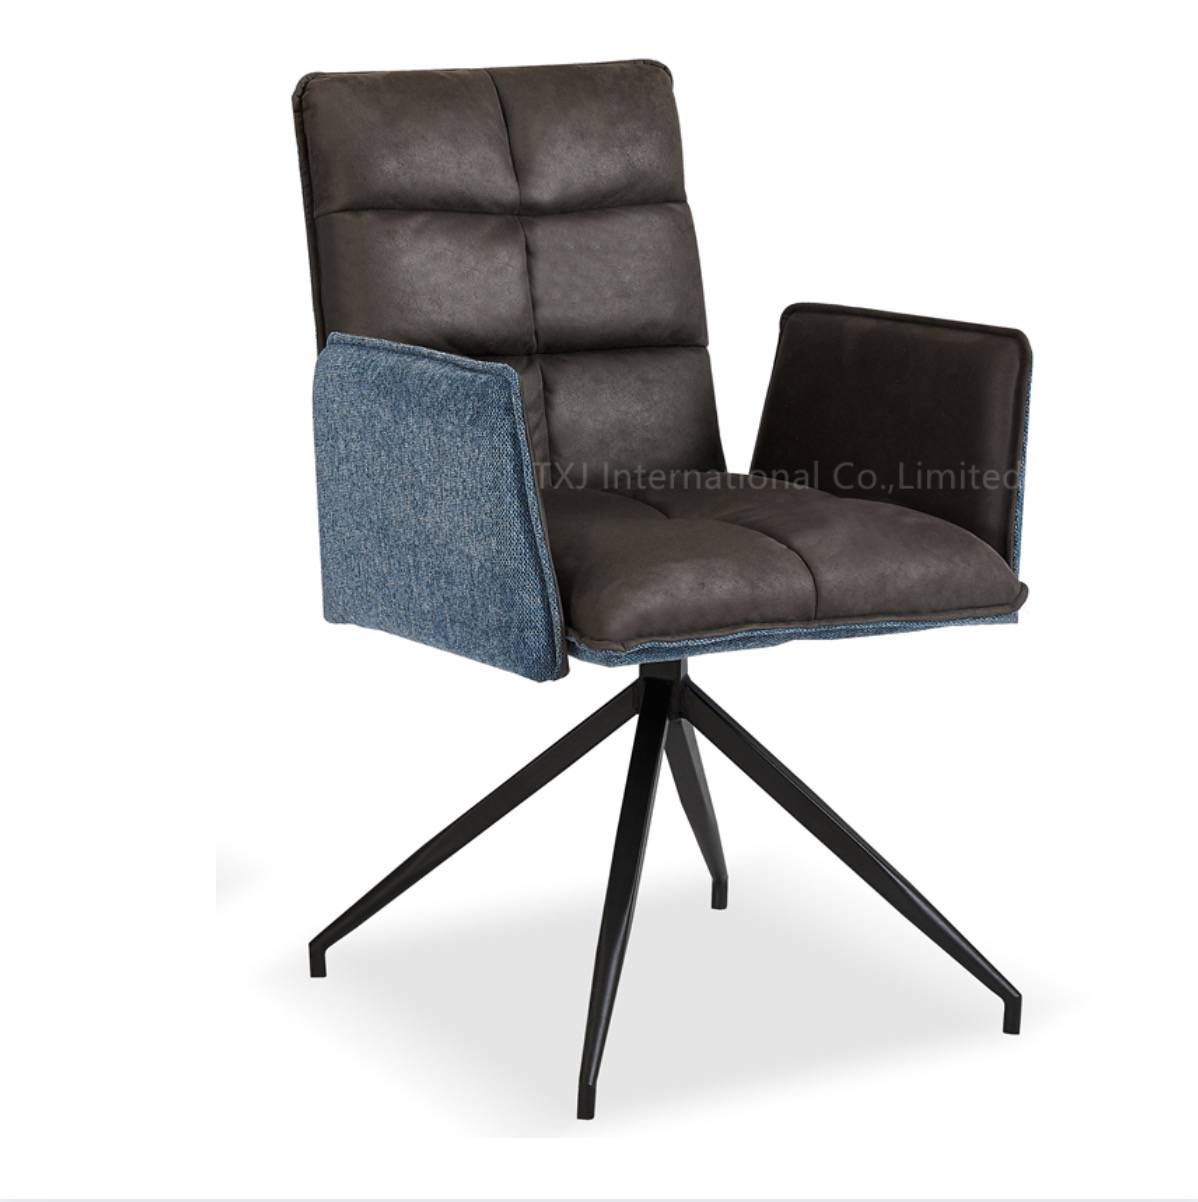 180° Swivel Arm Chair TC-2054 Featured Image